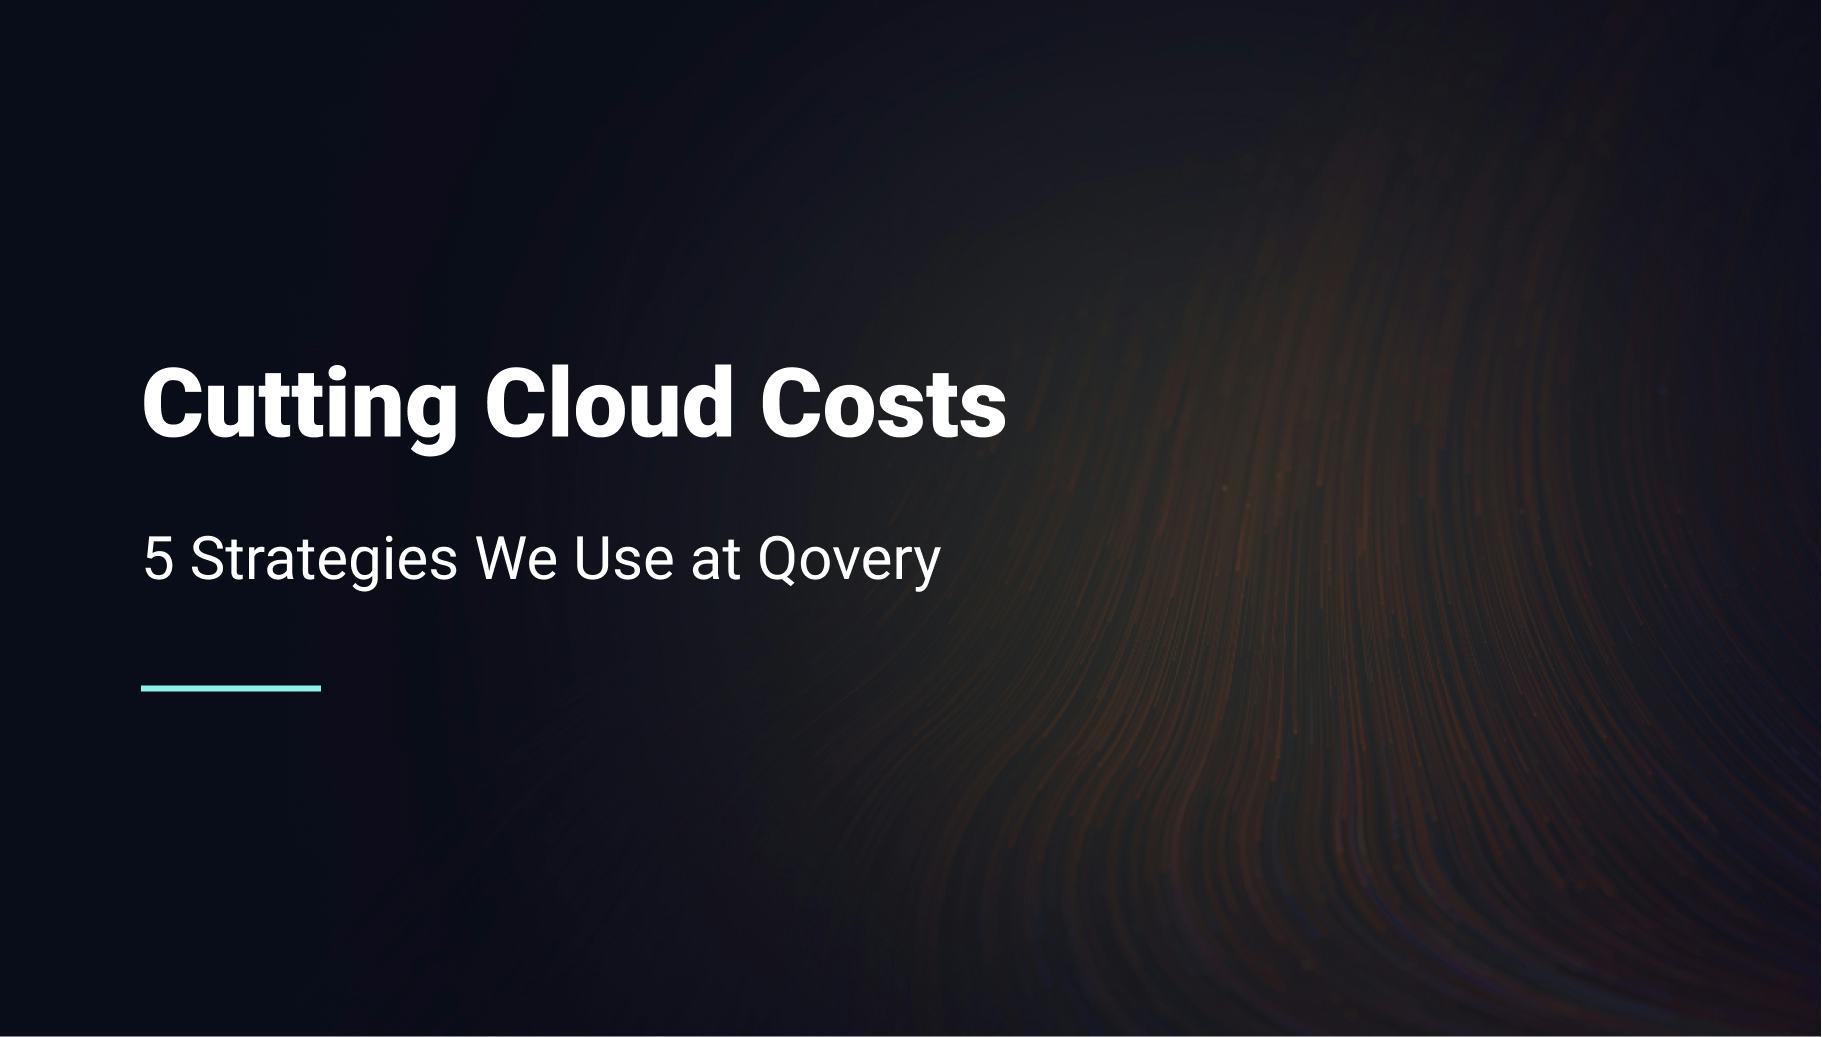 Cutting Cloud Costs: 5 Strategies We Use at Qovery - Qovery